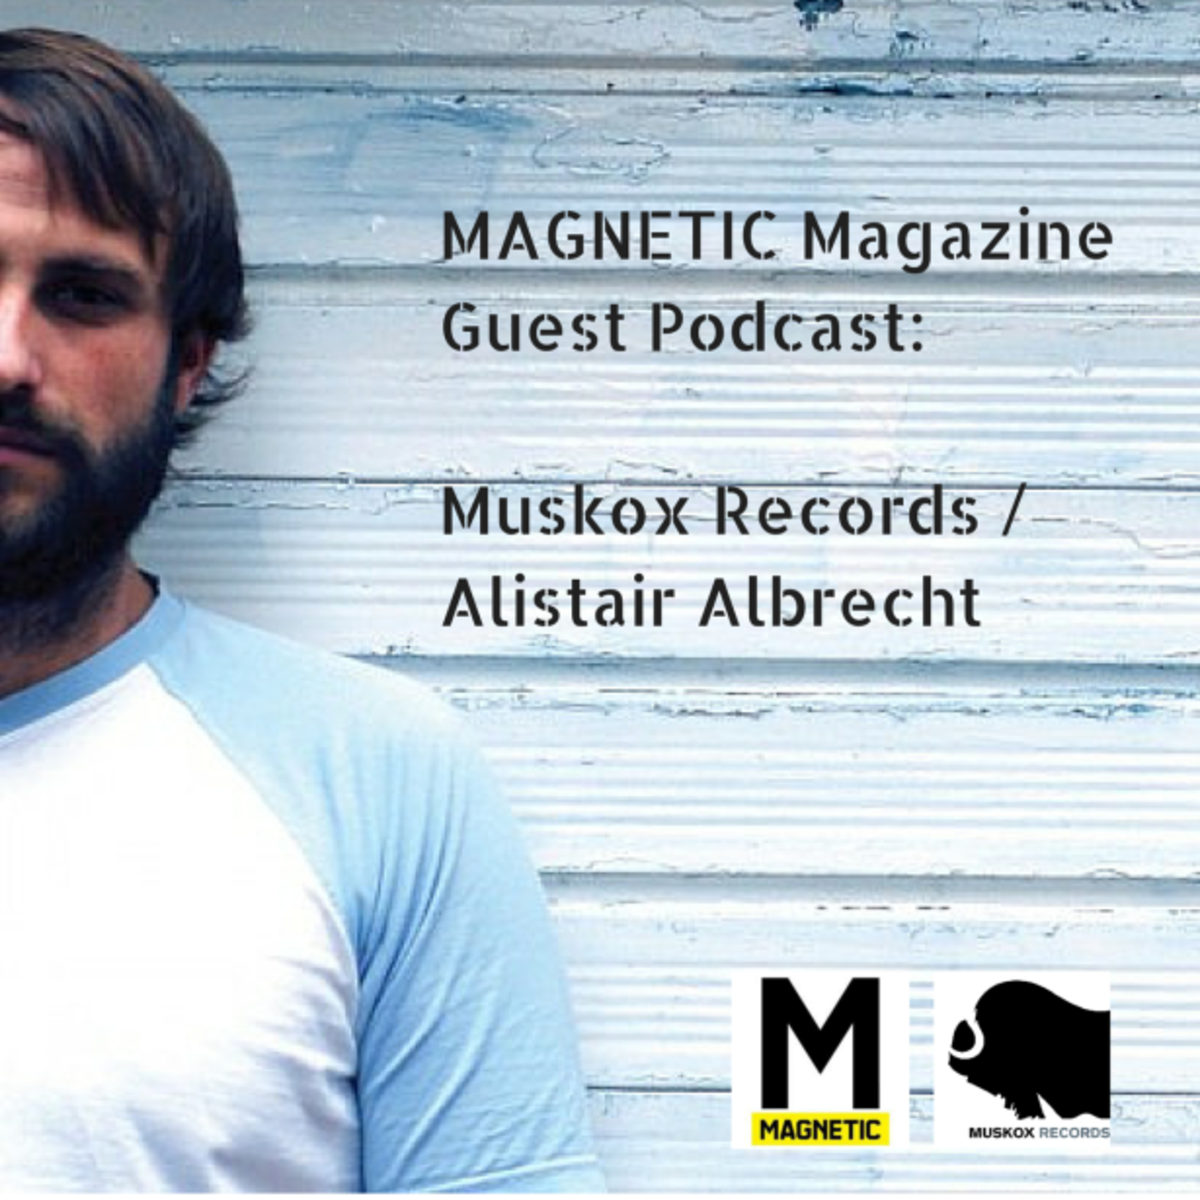 Muskox Records A New Force In Quality Electronic Music: Label Profile & Exclusive Podcast from Alistair Albrecht - See more at: http://www.magneticmag.com/#sthash.G8iM42r2.ys00SmT3.dpuf